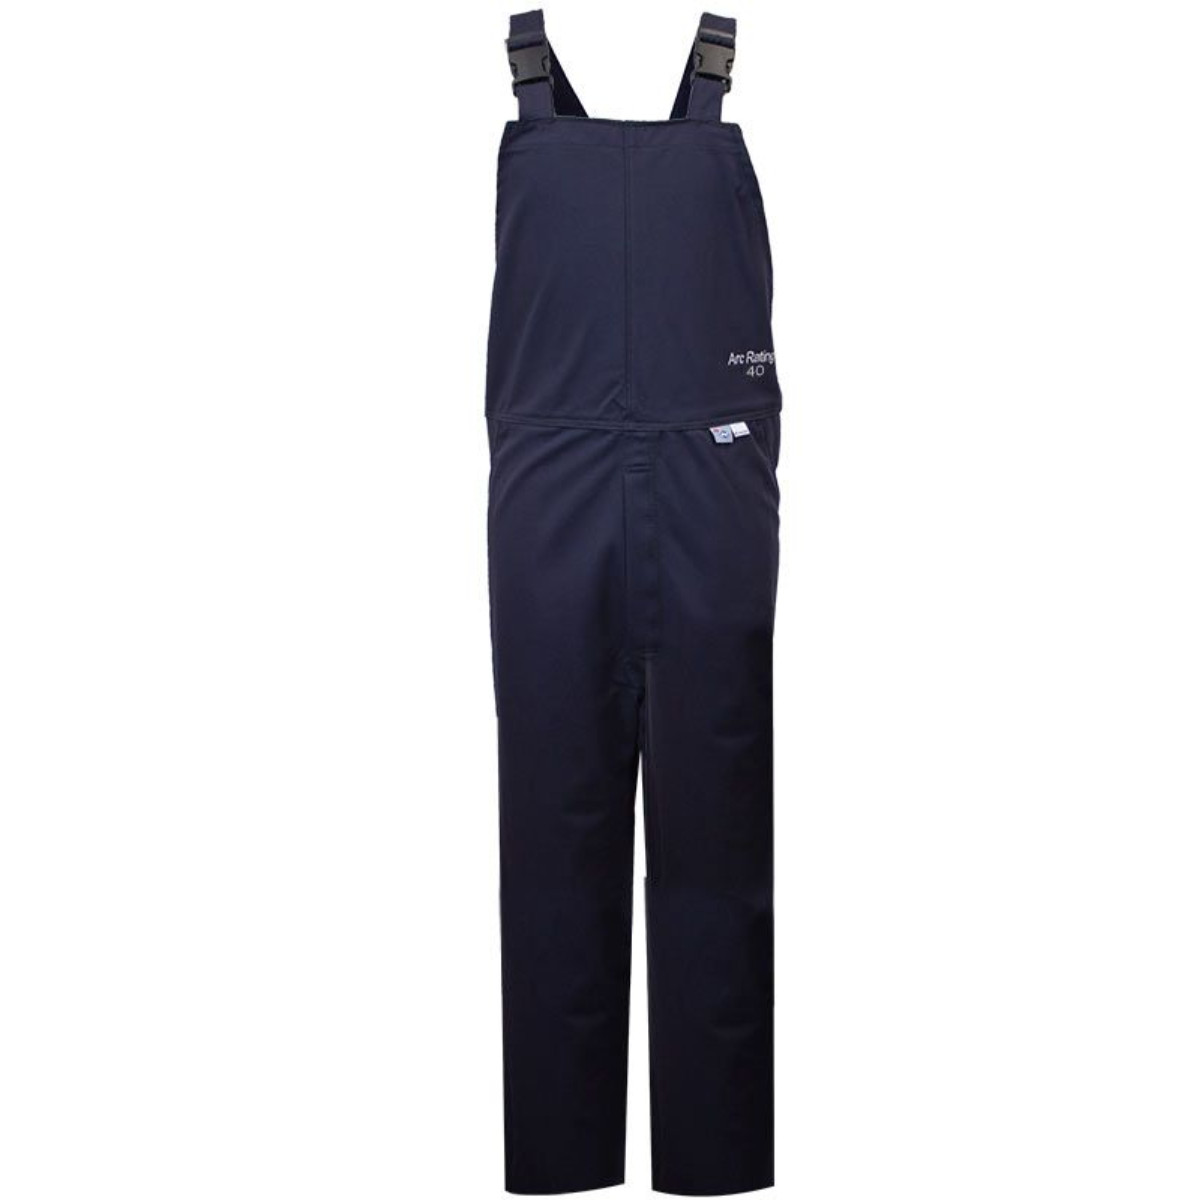 NSA 40 Cal-CAT 4 ArcGuard Compliance Bib Overall in Navy